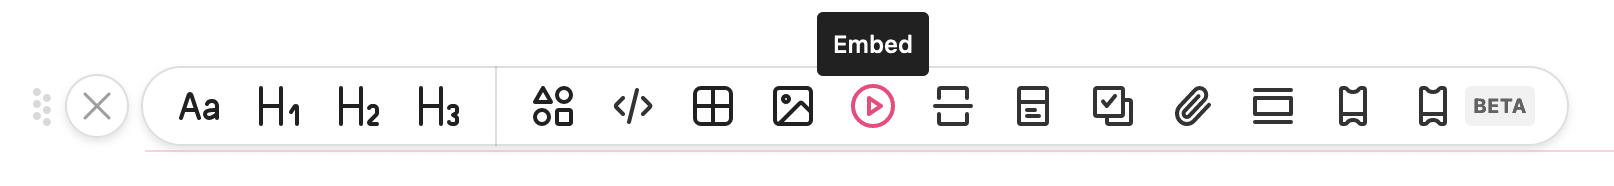 Embed function hovered over in the zeroheight toolbar.